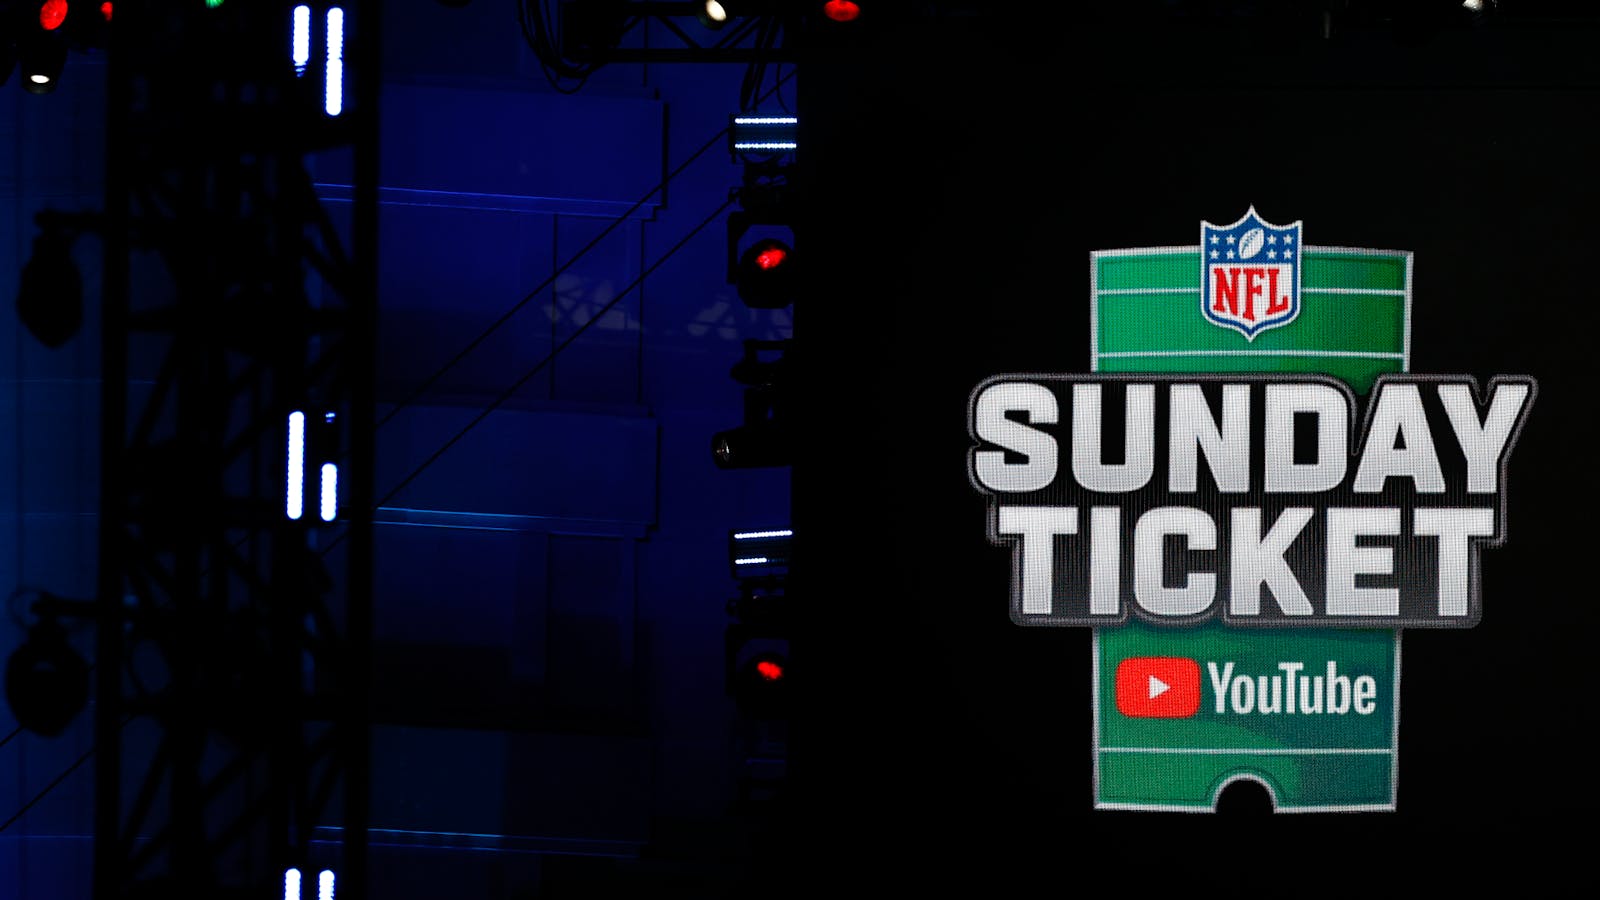 NFL Sunday Ticket on YouTube graphic during the 2023 NFL Draft on April 27. Photo by AP.